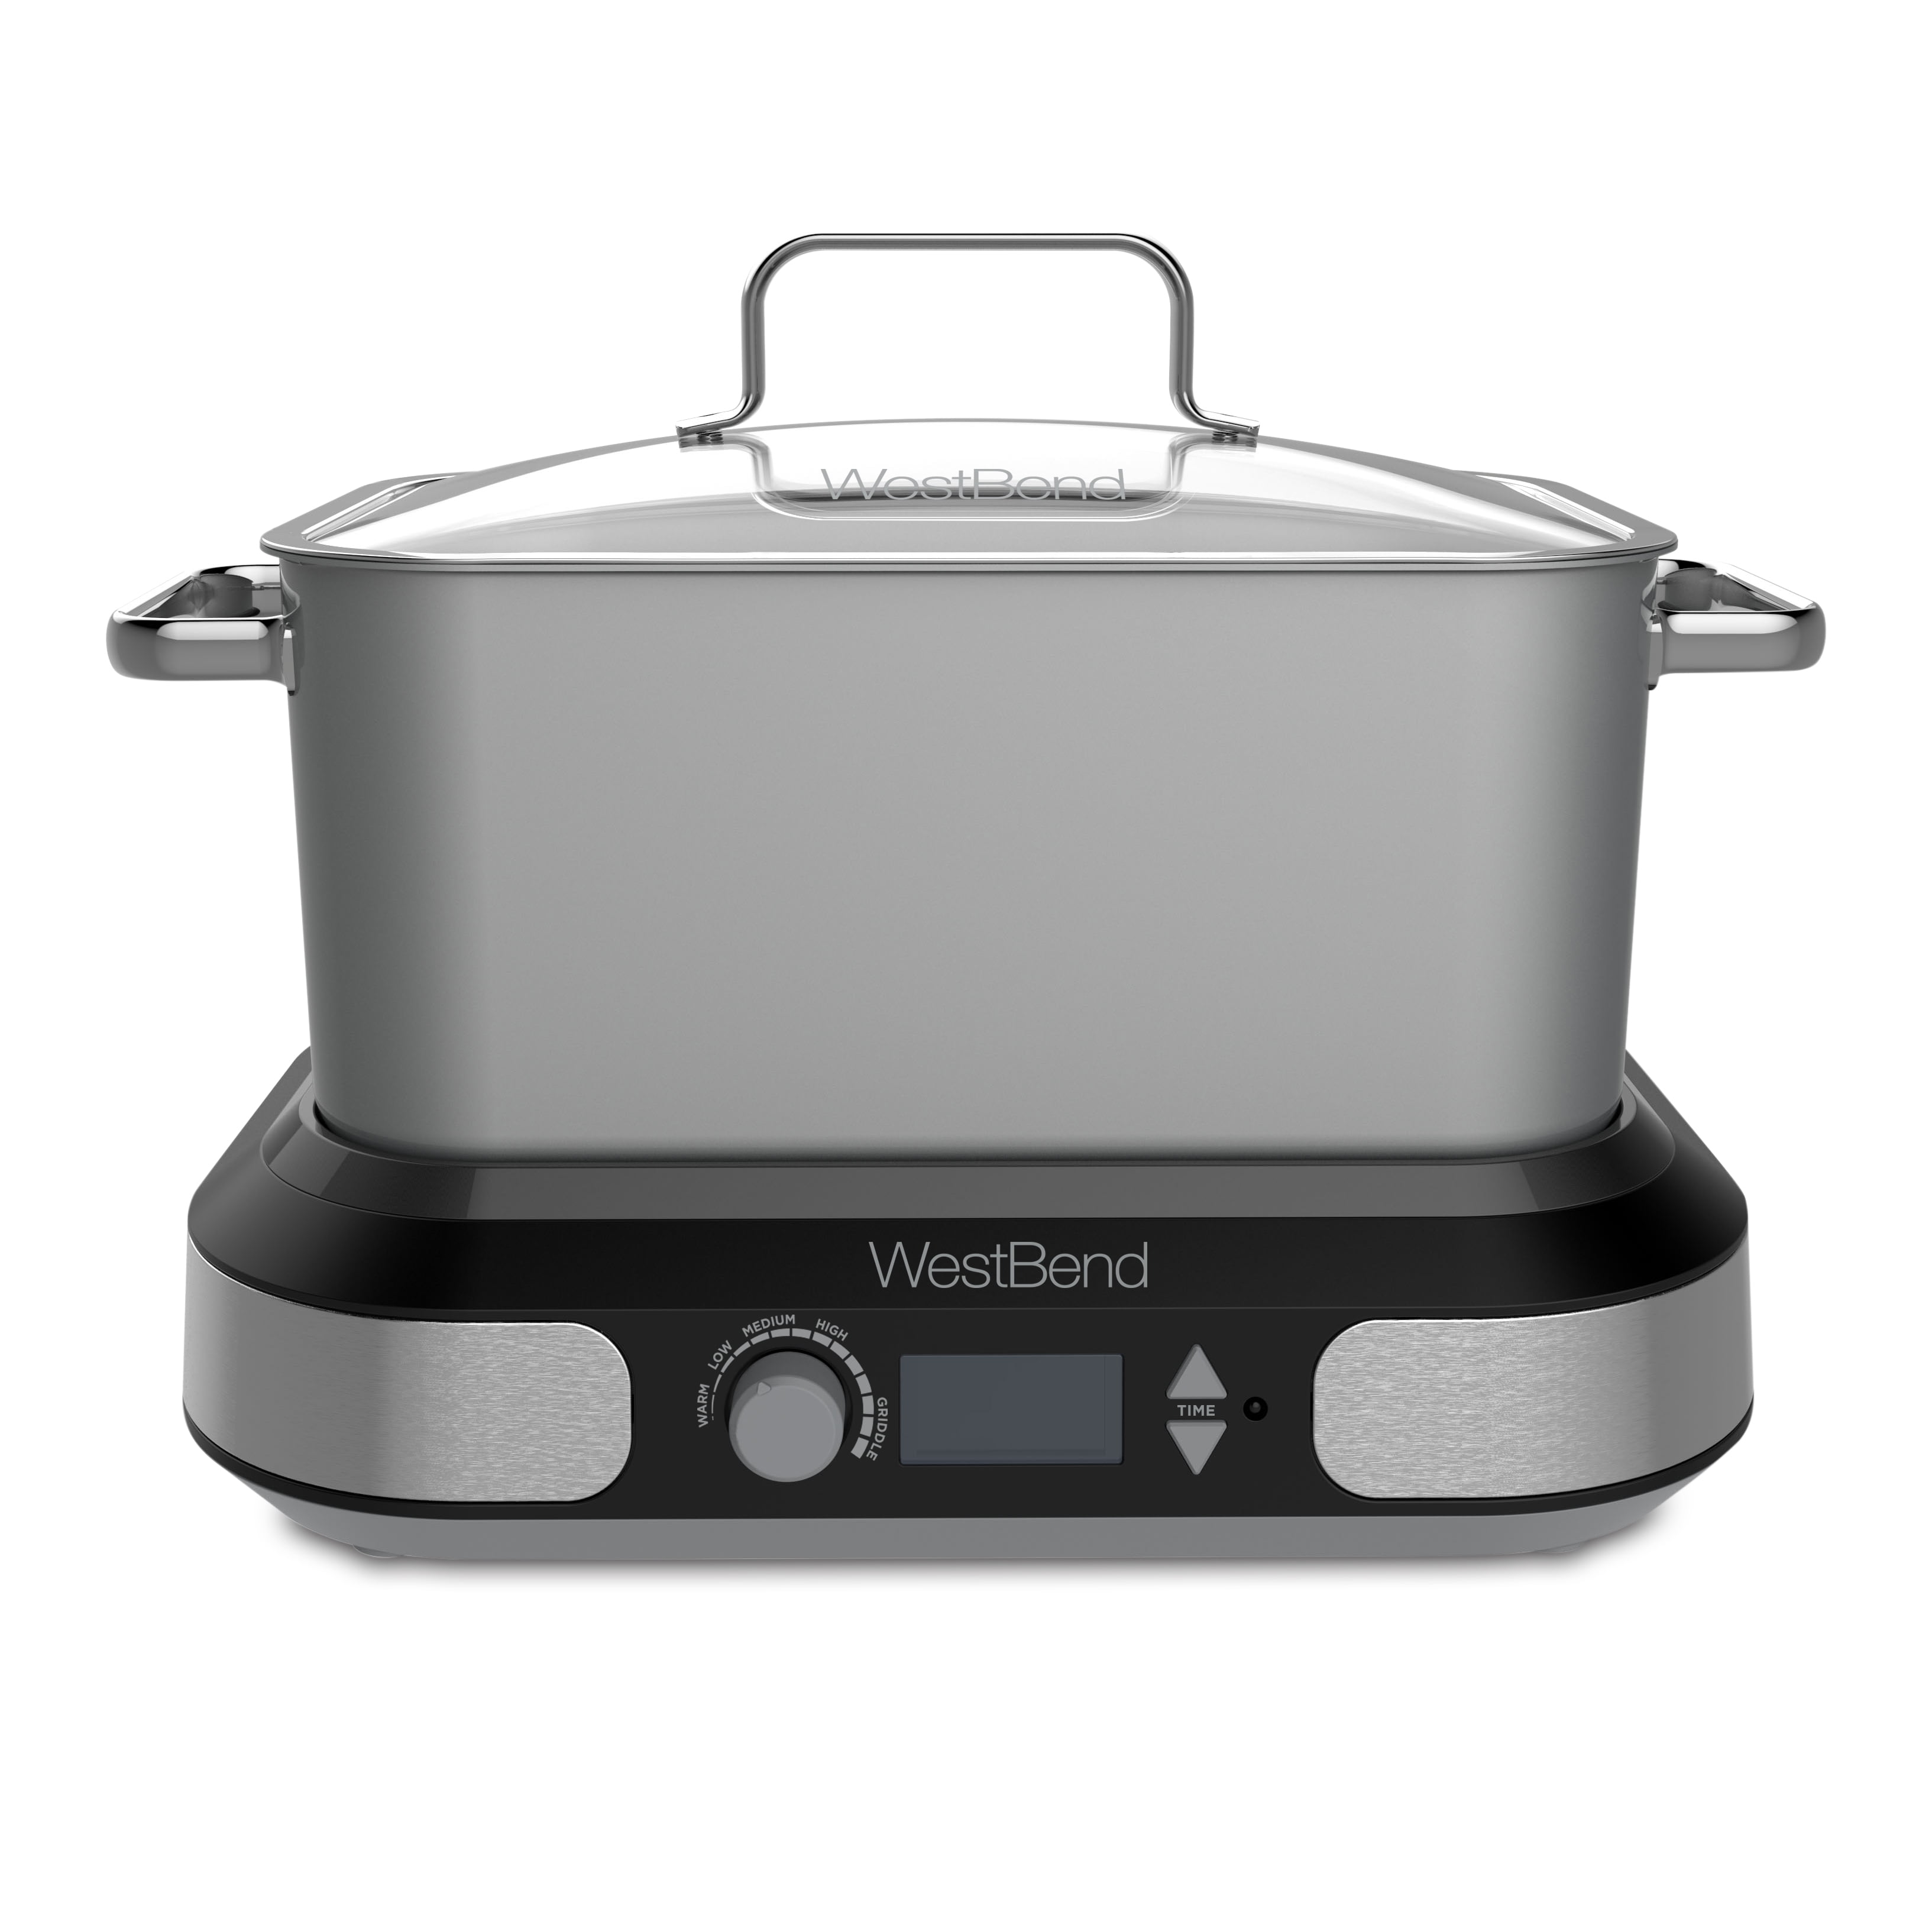 West Bend 5 QT. Versatility Cooker, Includes Bag and Lid, Red